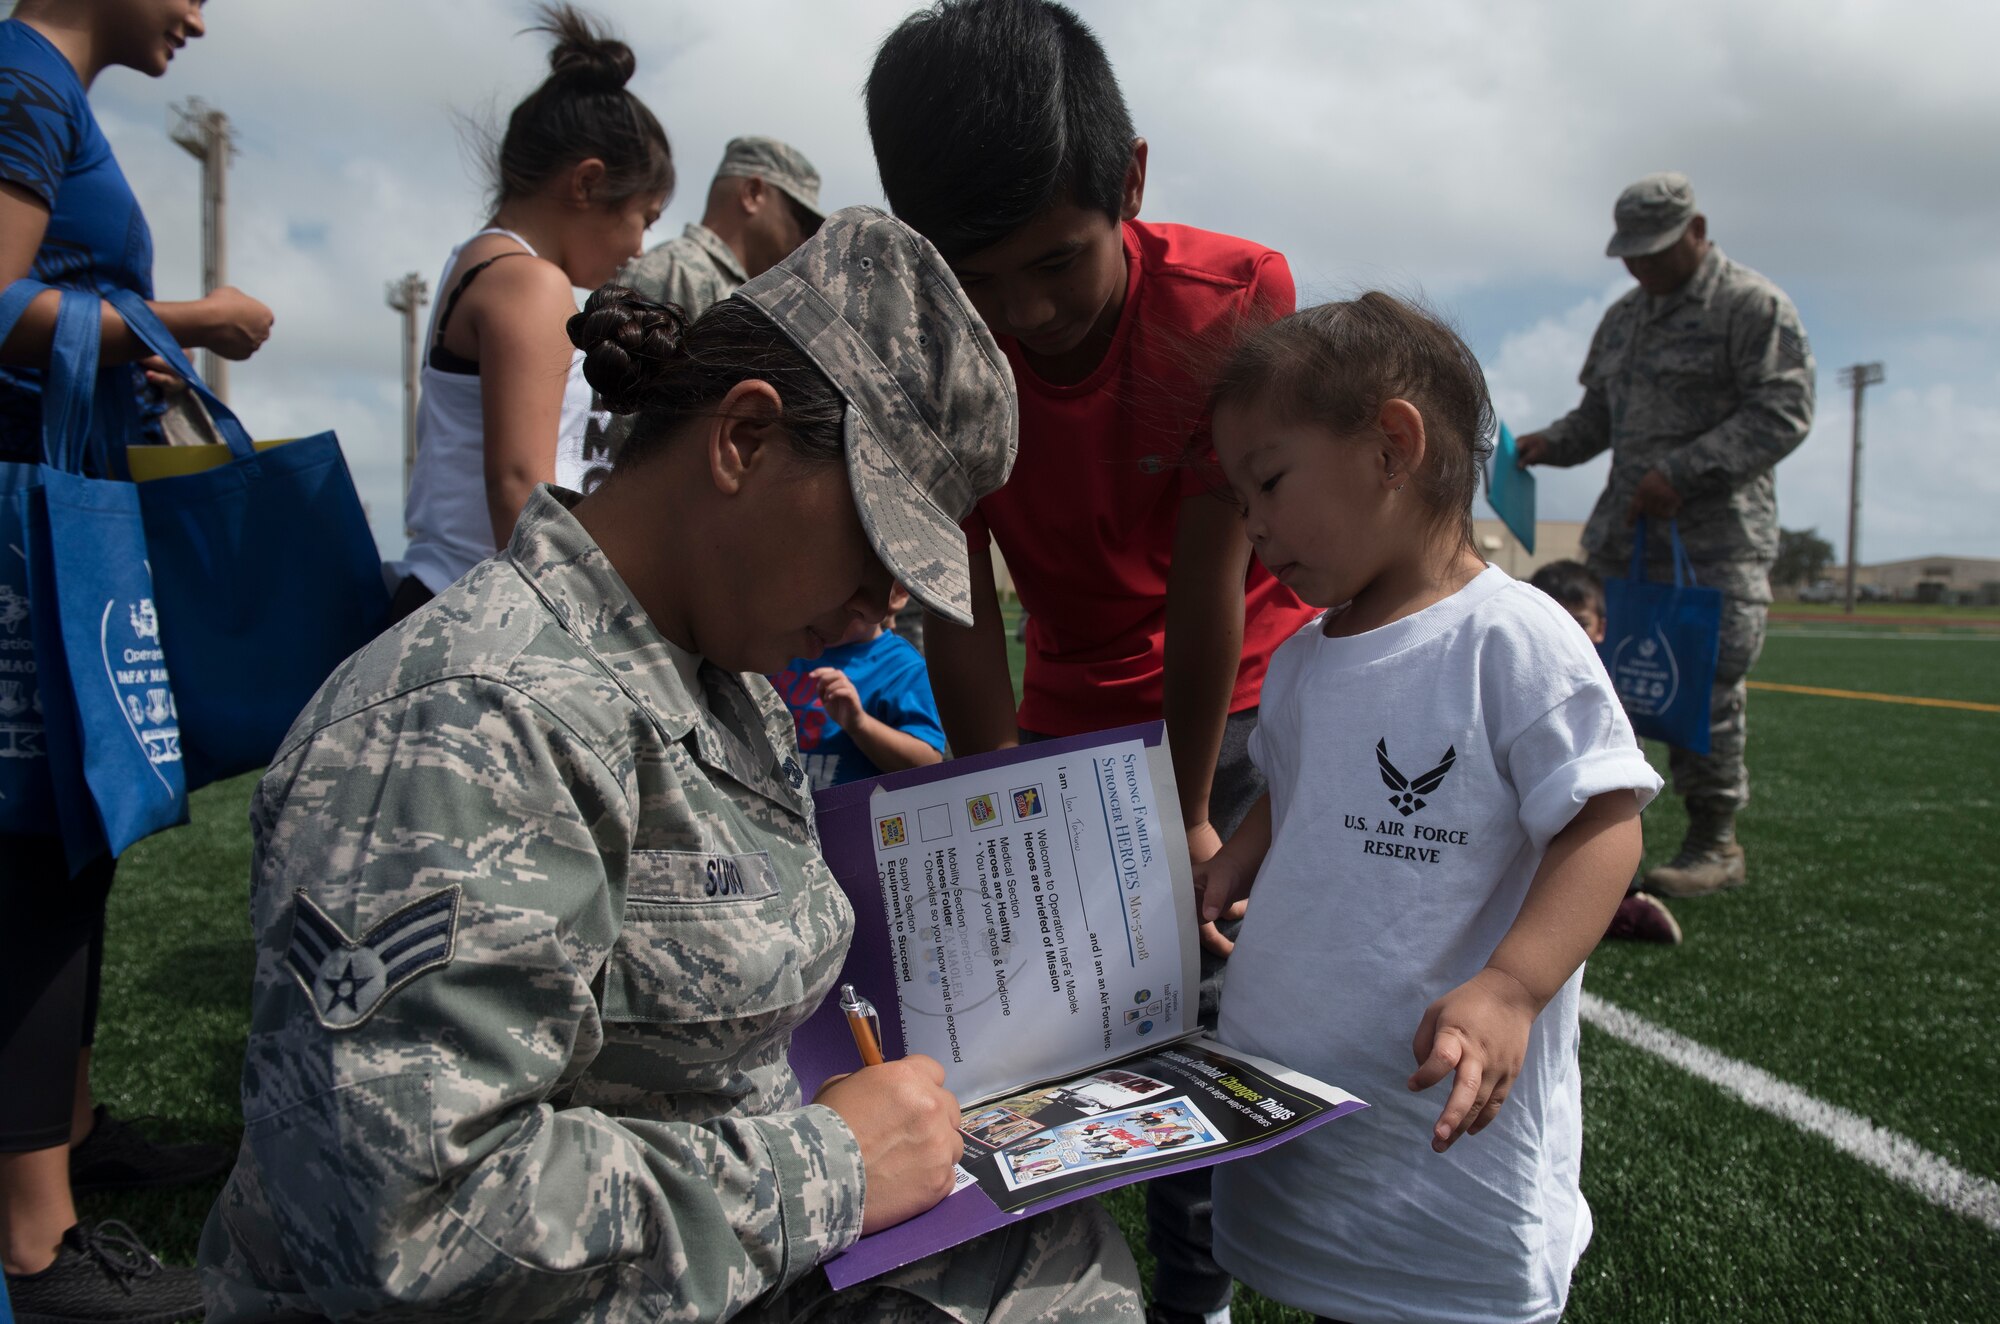 U.S. Air Force Senior Airman Lourkrina M. Sudo, assigned to the U.S. Air Force Reserve’s 44th Aerial Port Squadron, signs off military children for their physical fitness portion of Operation Inafa’ Maolek at Andersen Air Force Base, May 5, 2018.